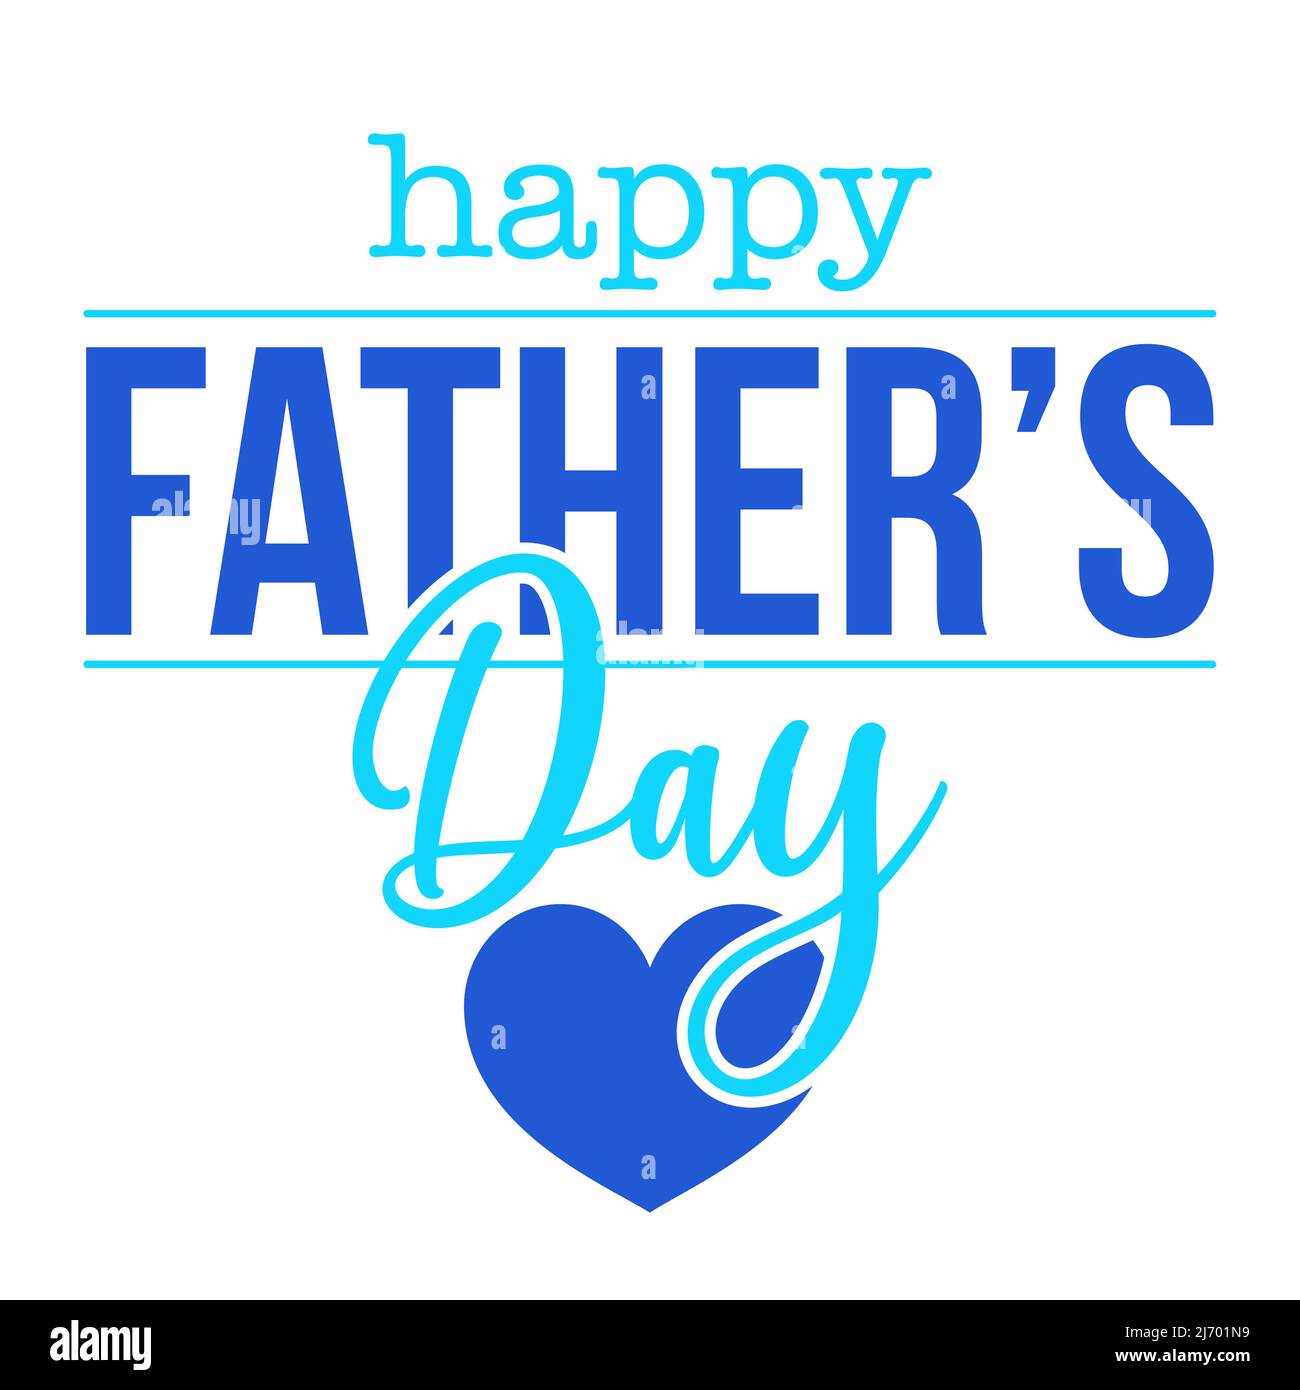 Happy Fathers Day Lettering Greeting Card Handmade Calligraphy Vector